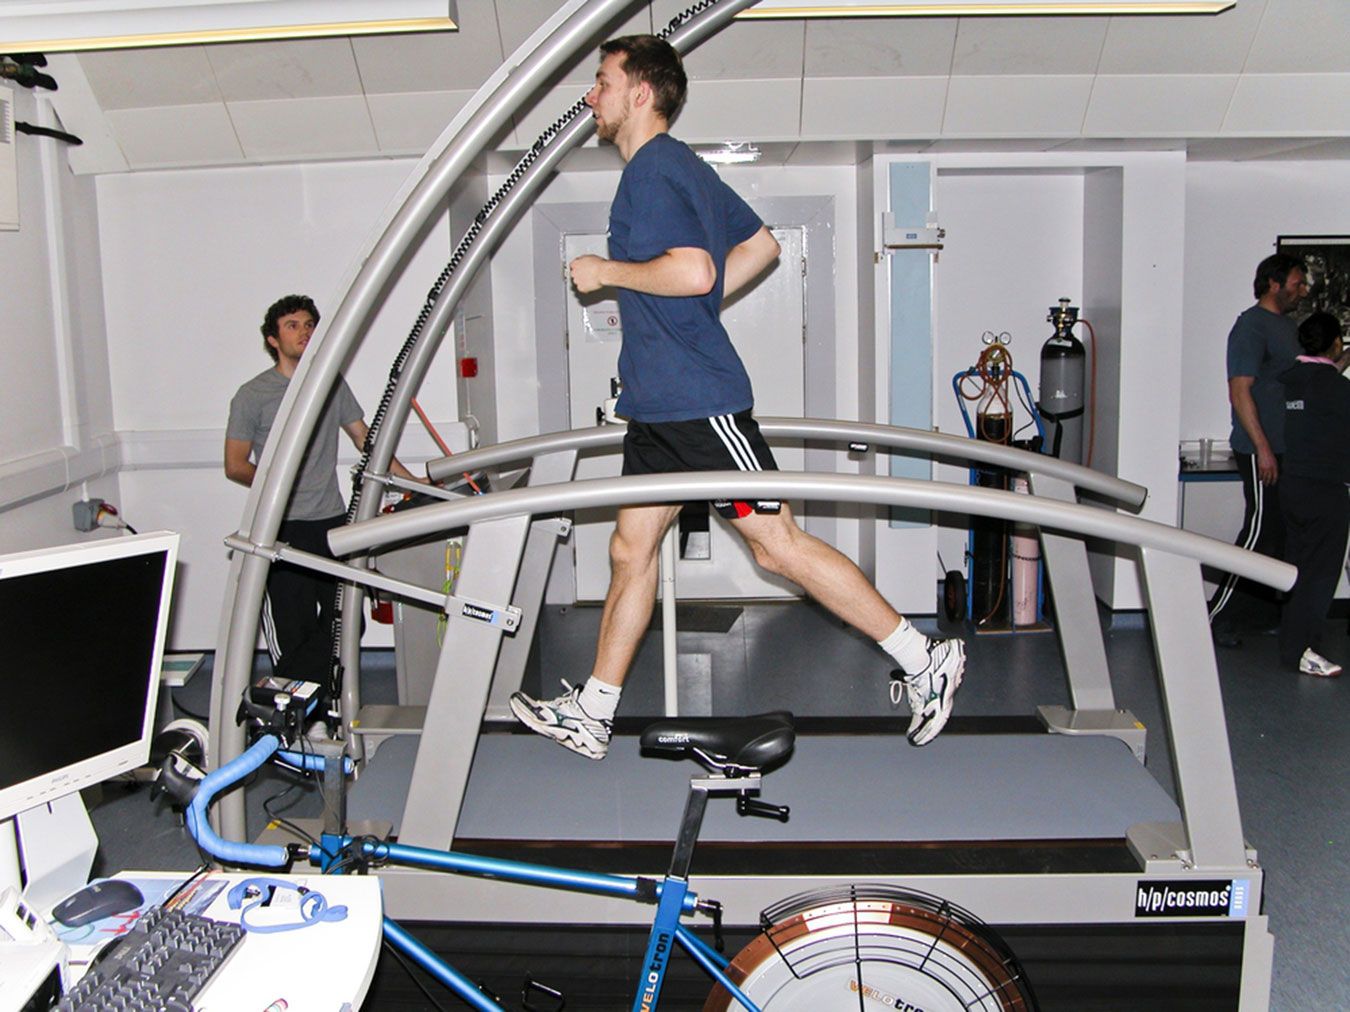 Kingston University's sport science course climbed 30 place to 15th in the country.